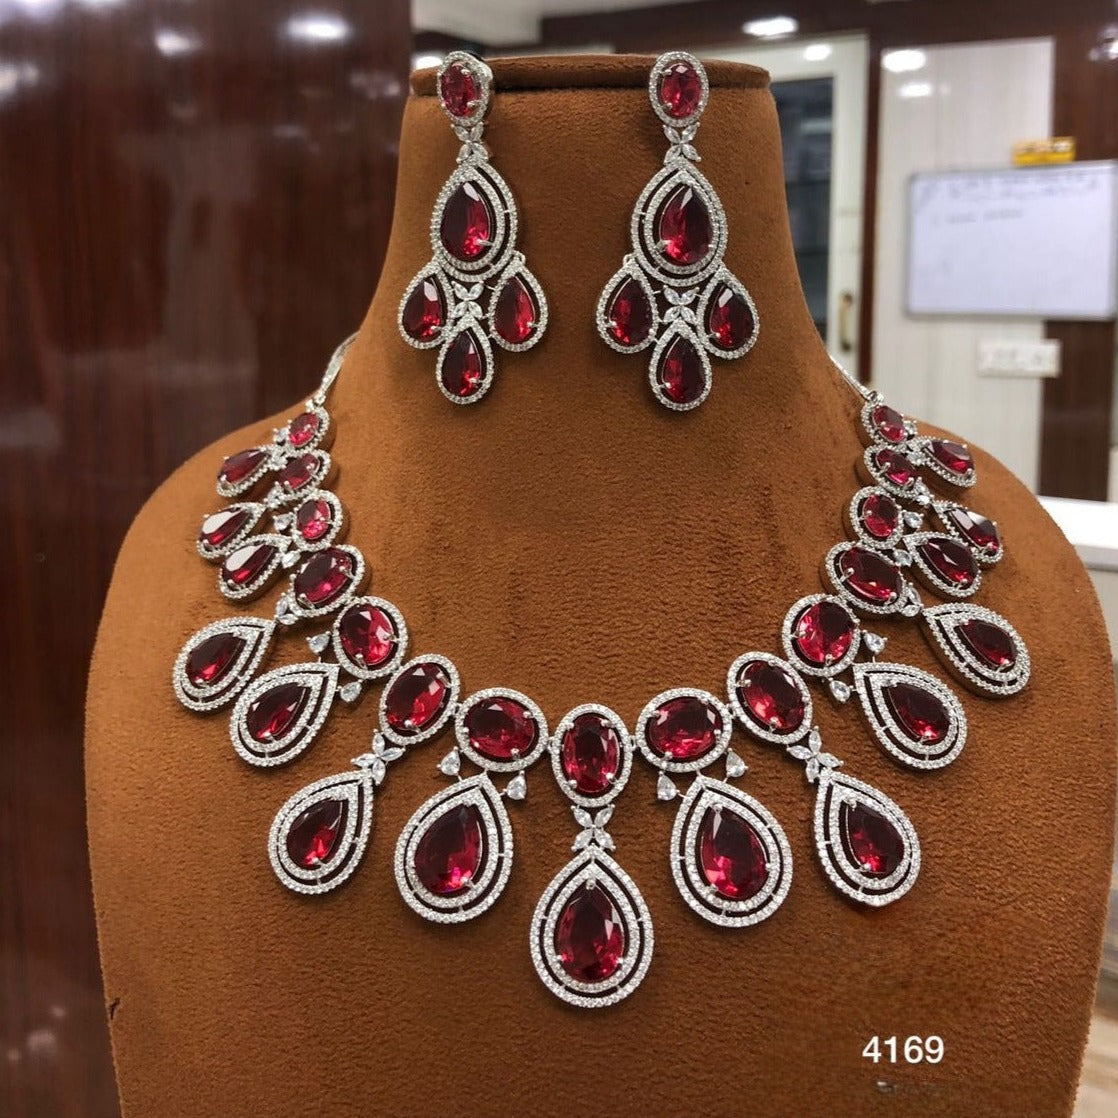 Radiant Elegance: American Diamond Necklace Set with Earrings - Complete Jewellery Ensemble